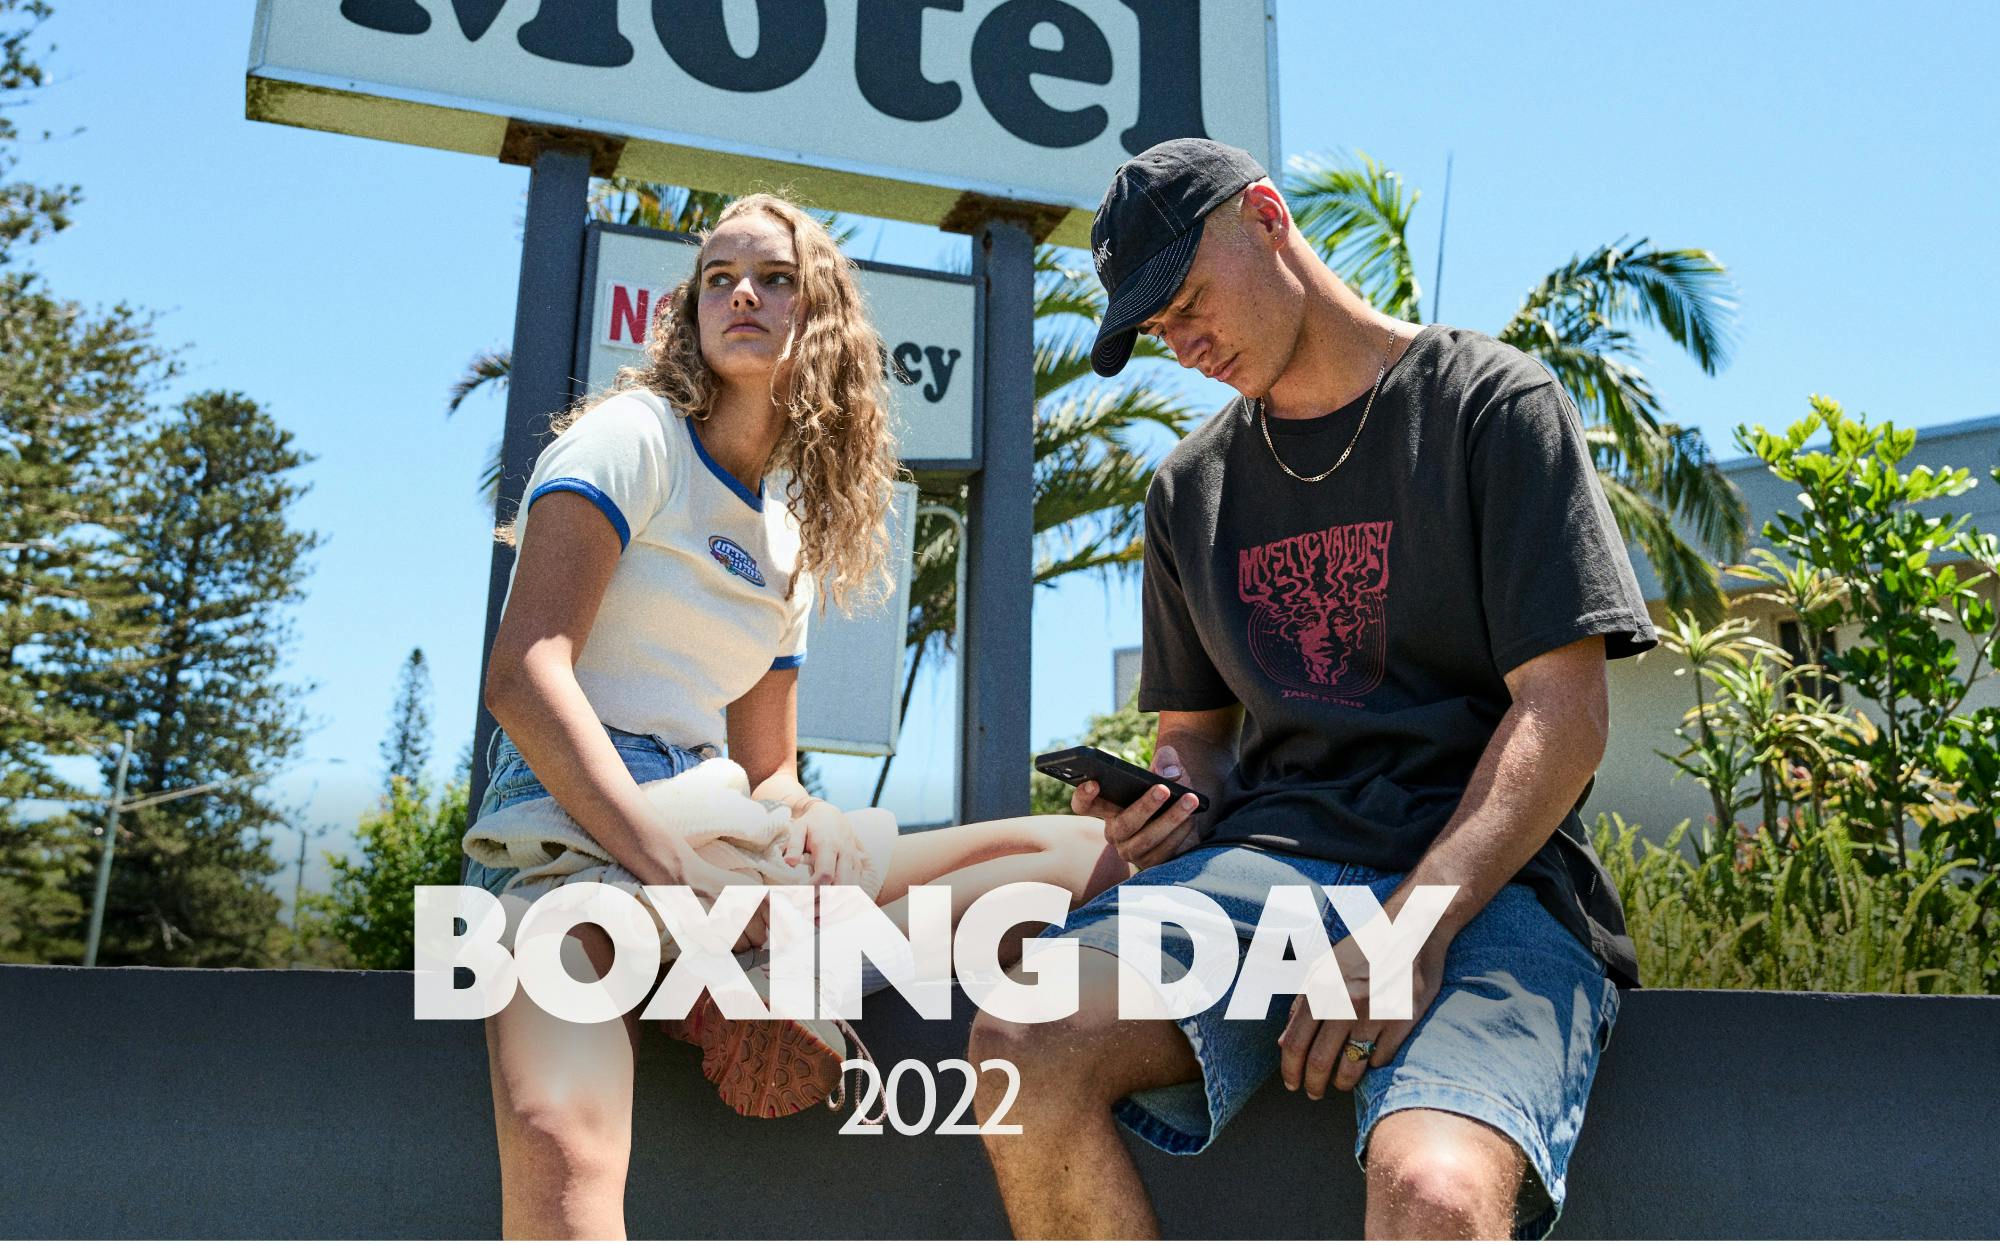 Image of a male and female model sitting on a ledge in front of a sign that reads 'Motel'. The text overlay on the image reads "Boxing Day 2022". 
The female is wearing our Crazy Crop Tee and denim shorts. The male is wearing our Mist Vintage Tee, Dogtown Shorts and Contrast Cap.